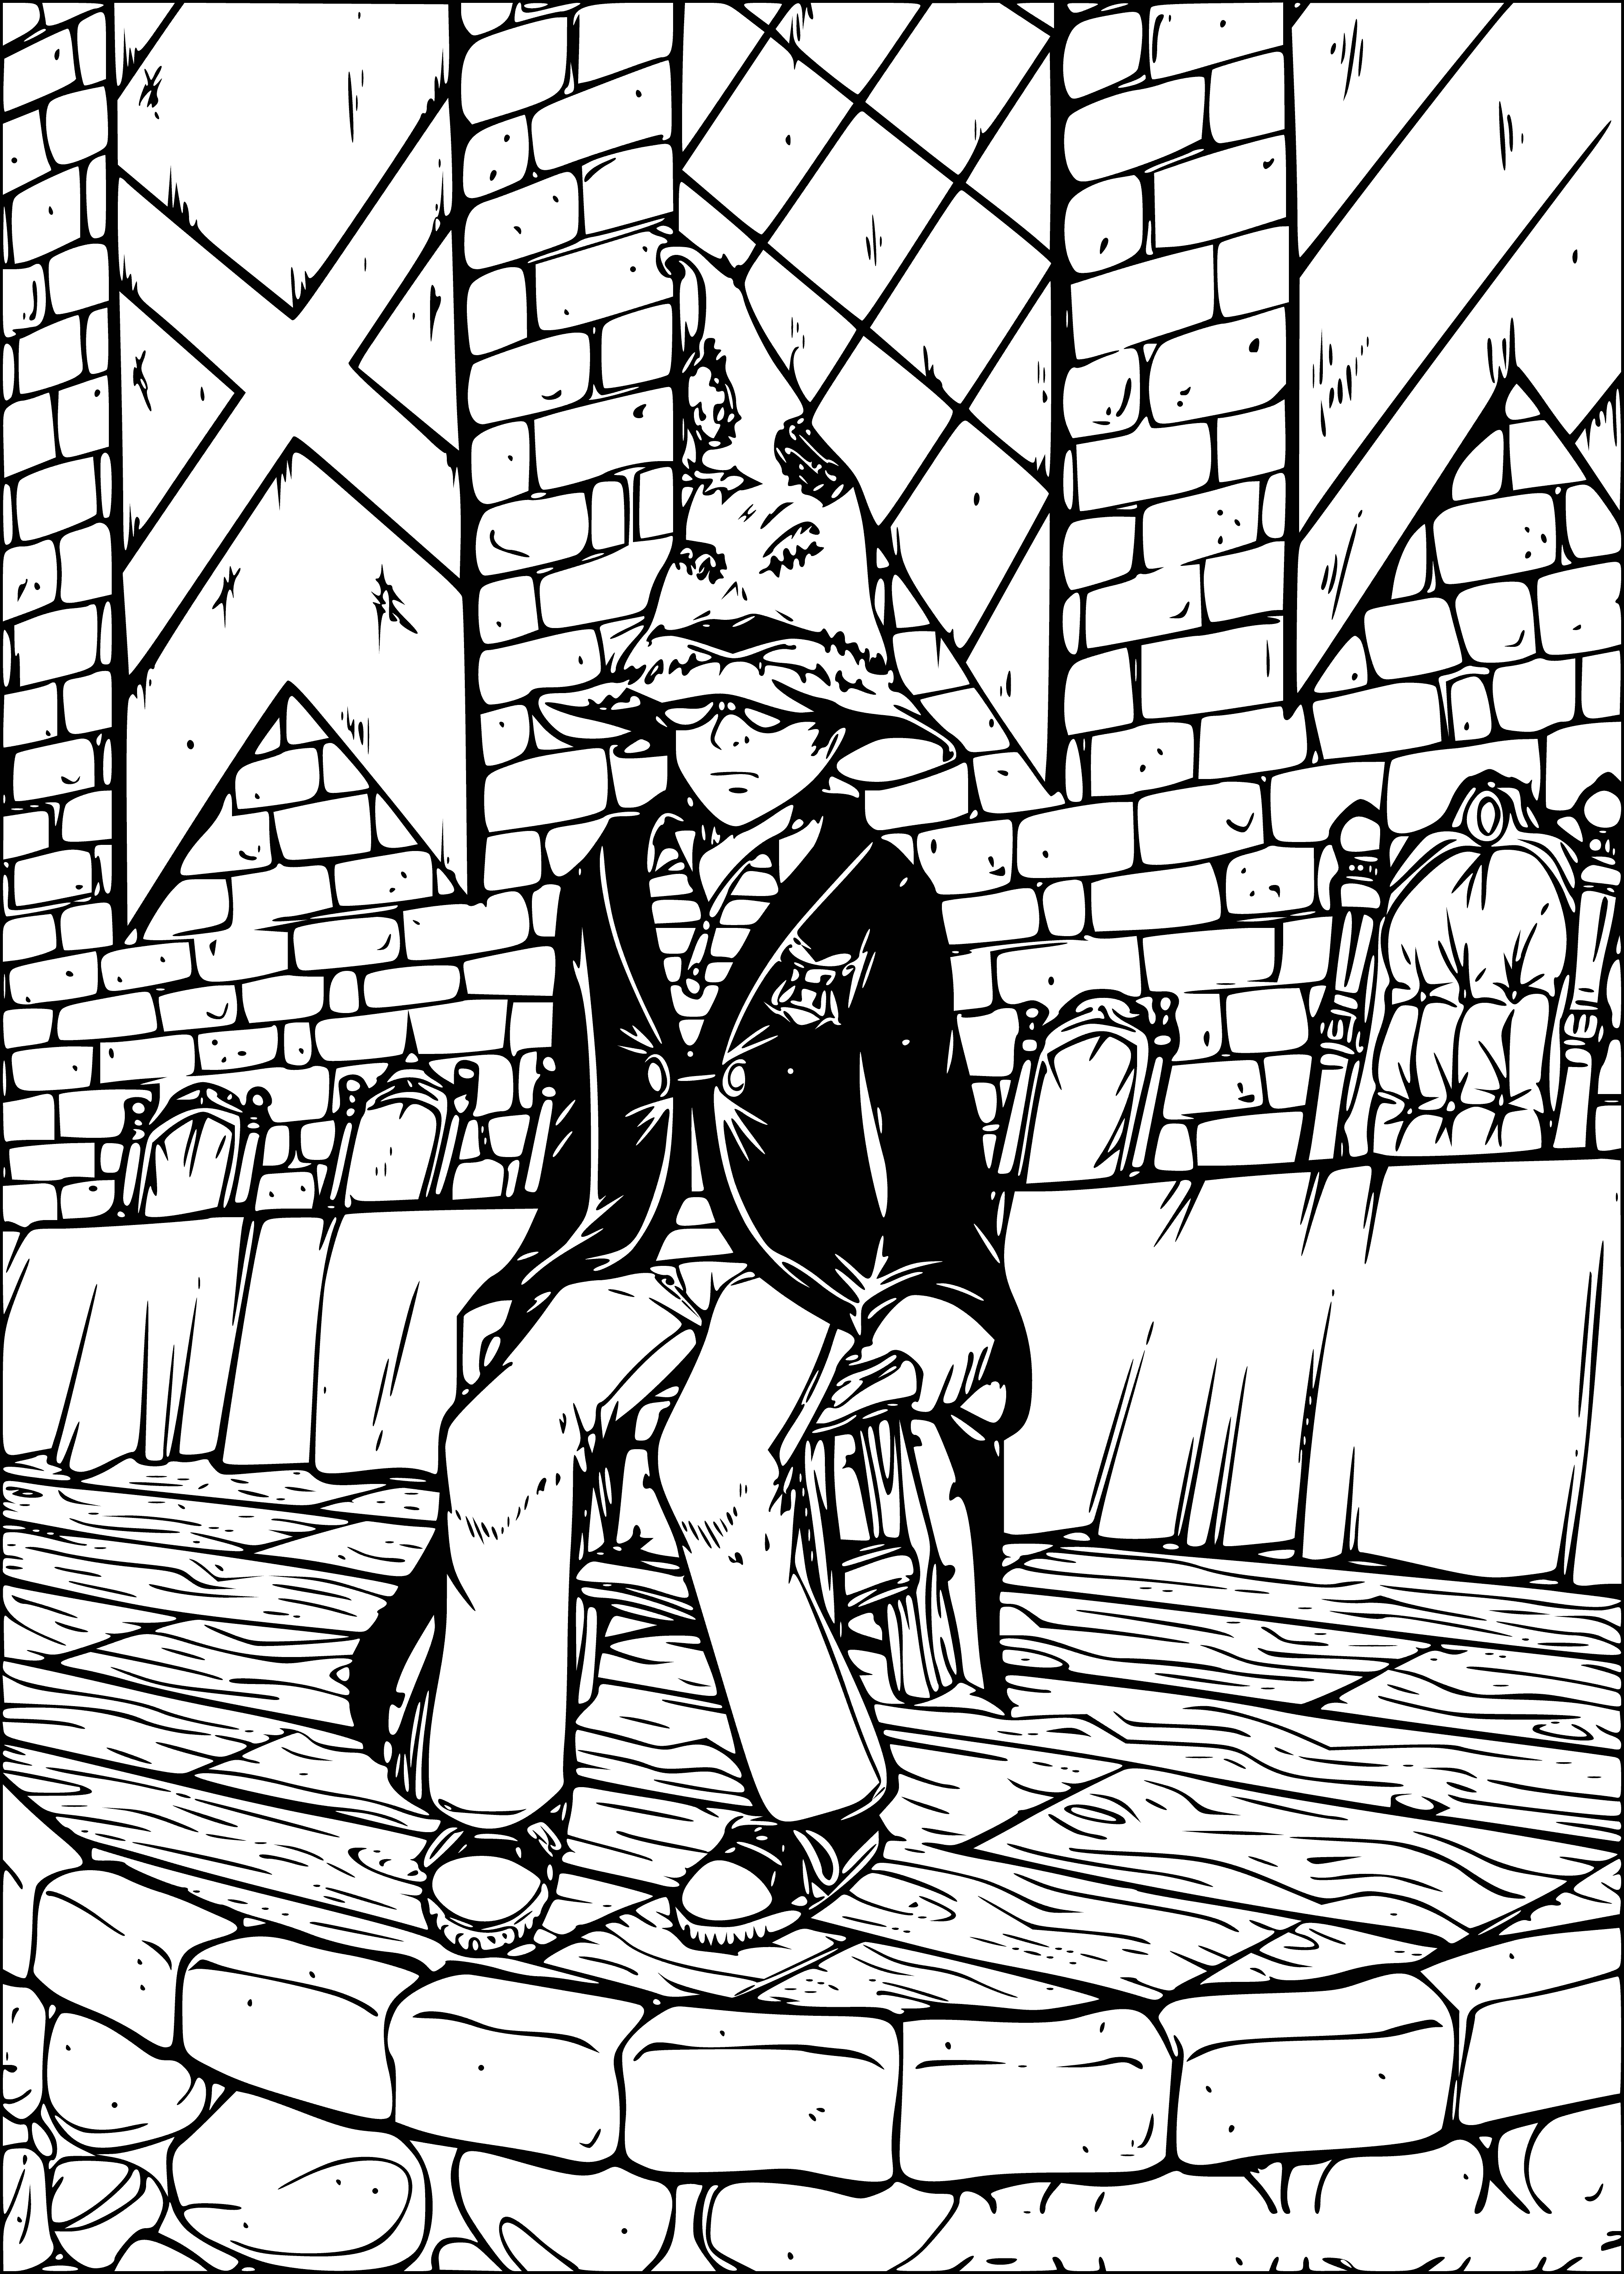 coloring page: Harry wears Hogwarts robe, clutching wand, looks up at Sorting Hat on a stool, tattered & torn with black button eyes & stitched mouth.